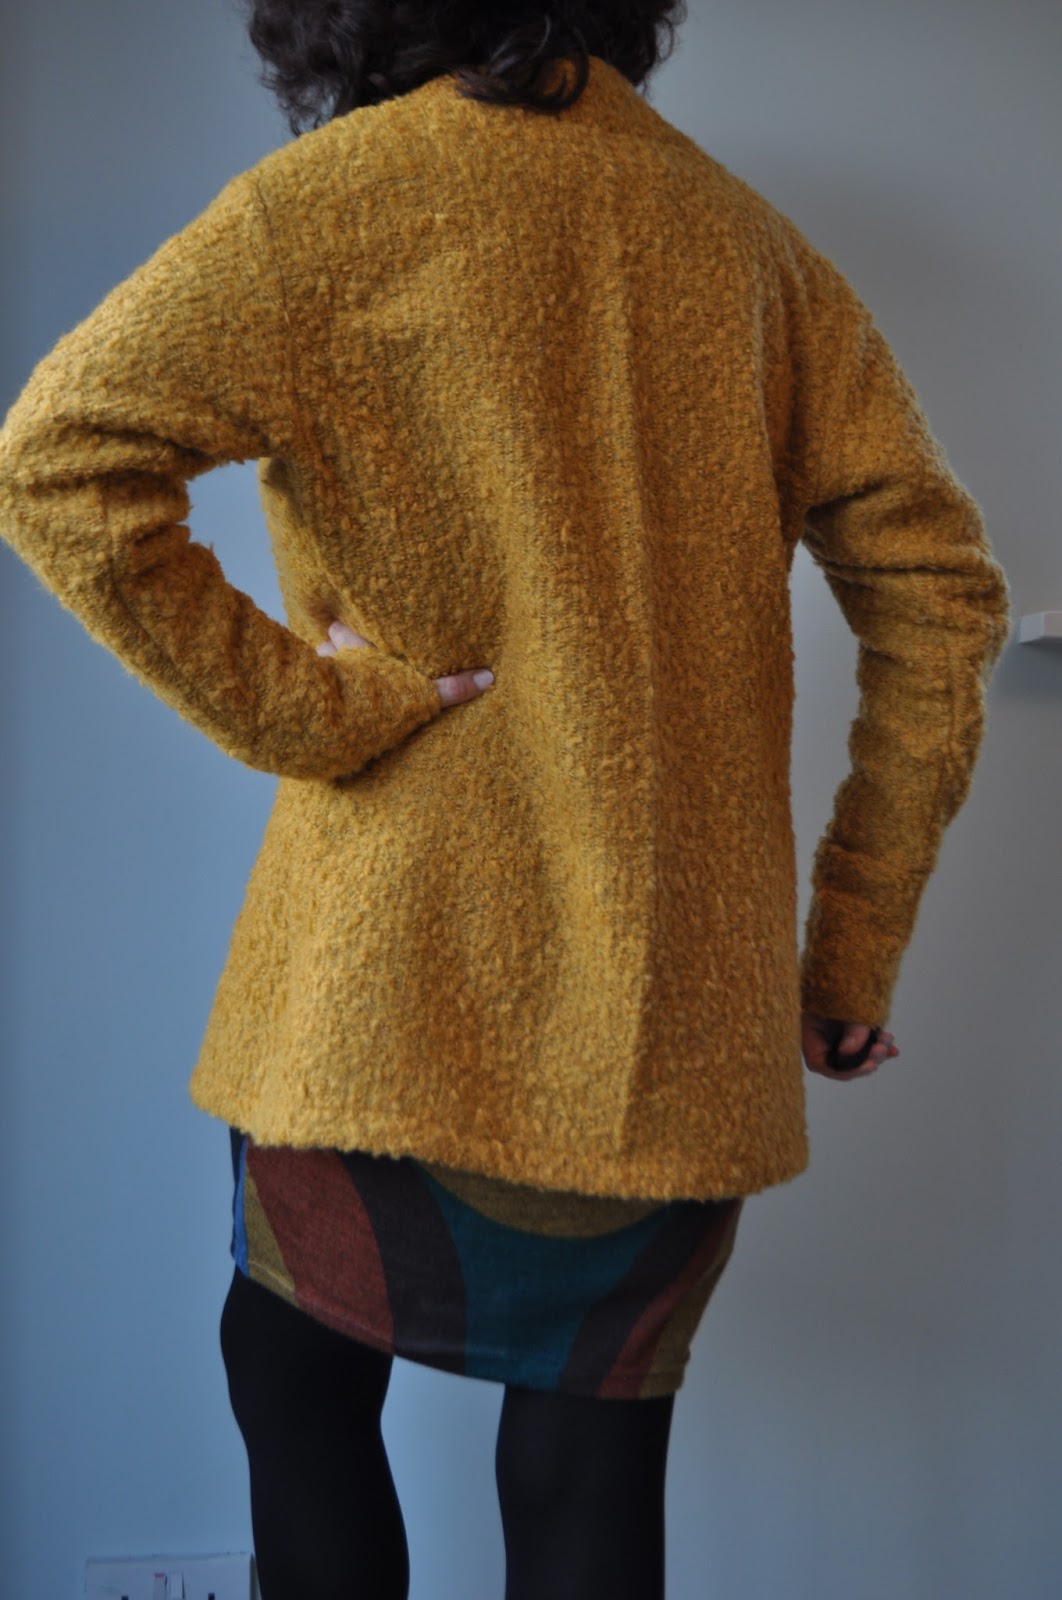 mags creative meanderings: GBSB Drapey Knit Dress and a mustard Oslo